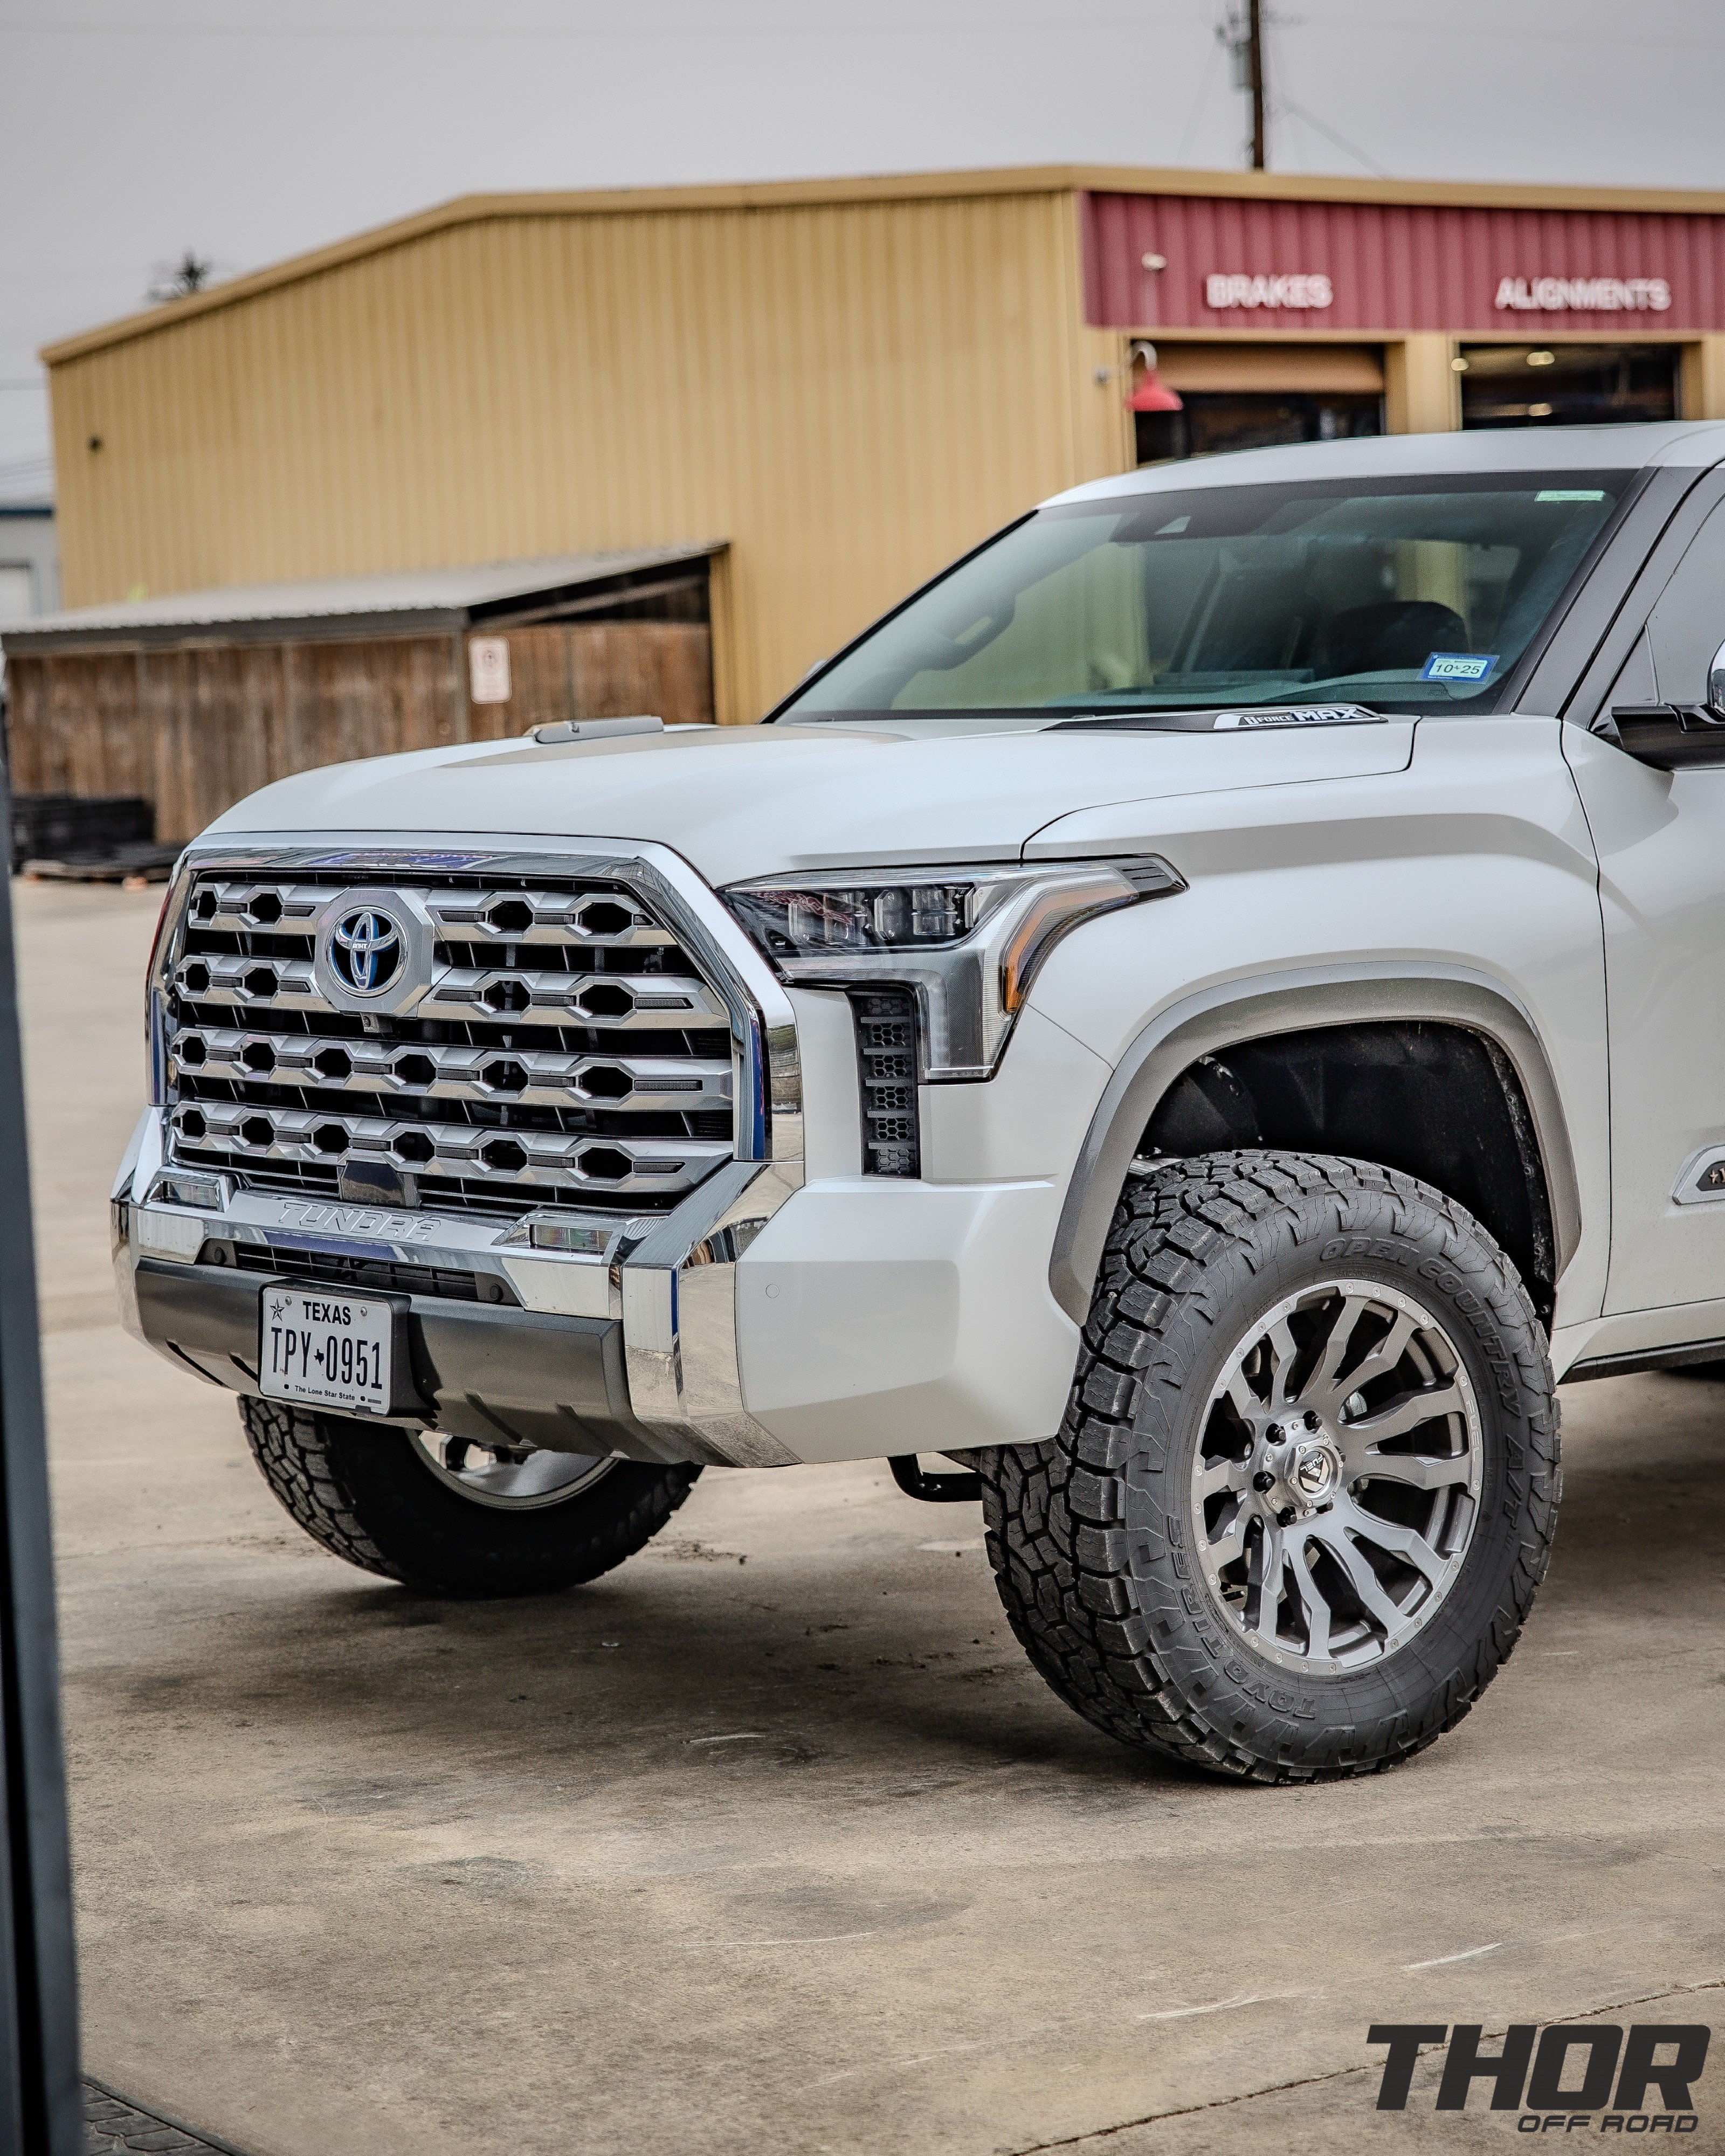 2023 Toyota Tundra 1794 Edition in Wind Chill Pearl with Rough Country 3.5" Lift Kit, Fuel Blitz 20x9" Wheels, 35x12.50R20 Toyo ATIII Tires